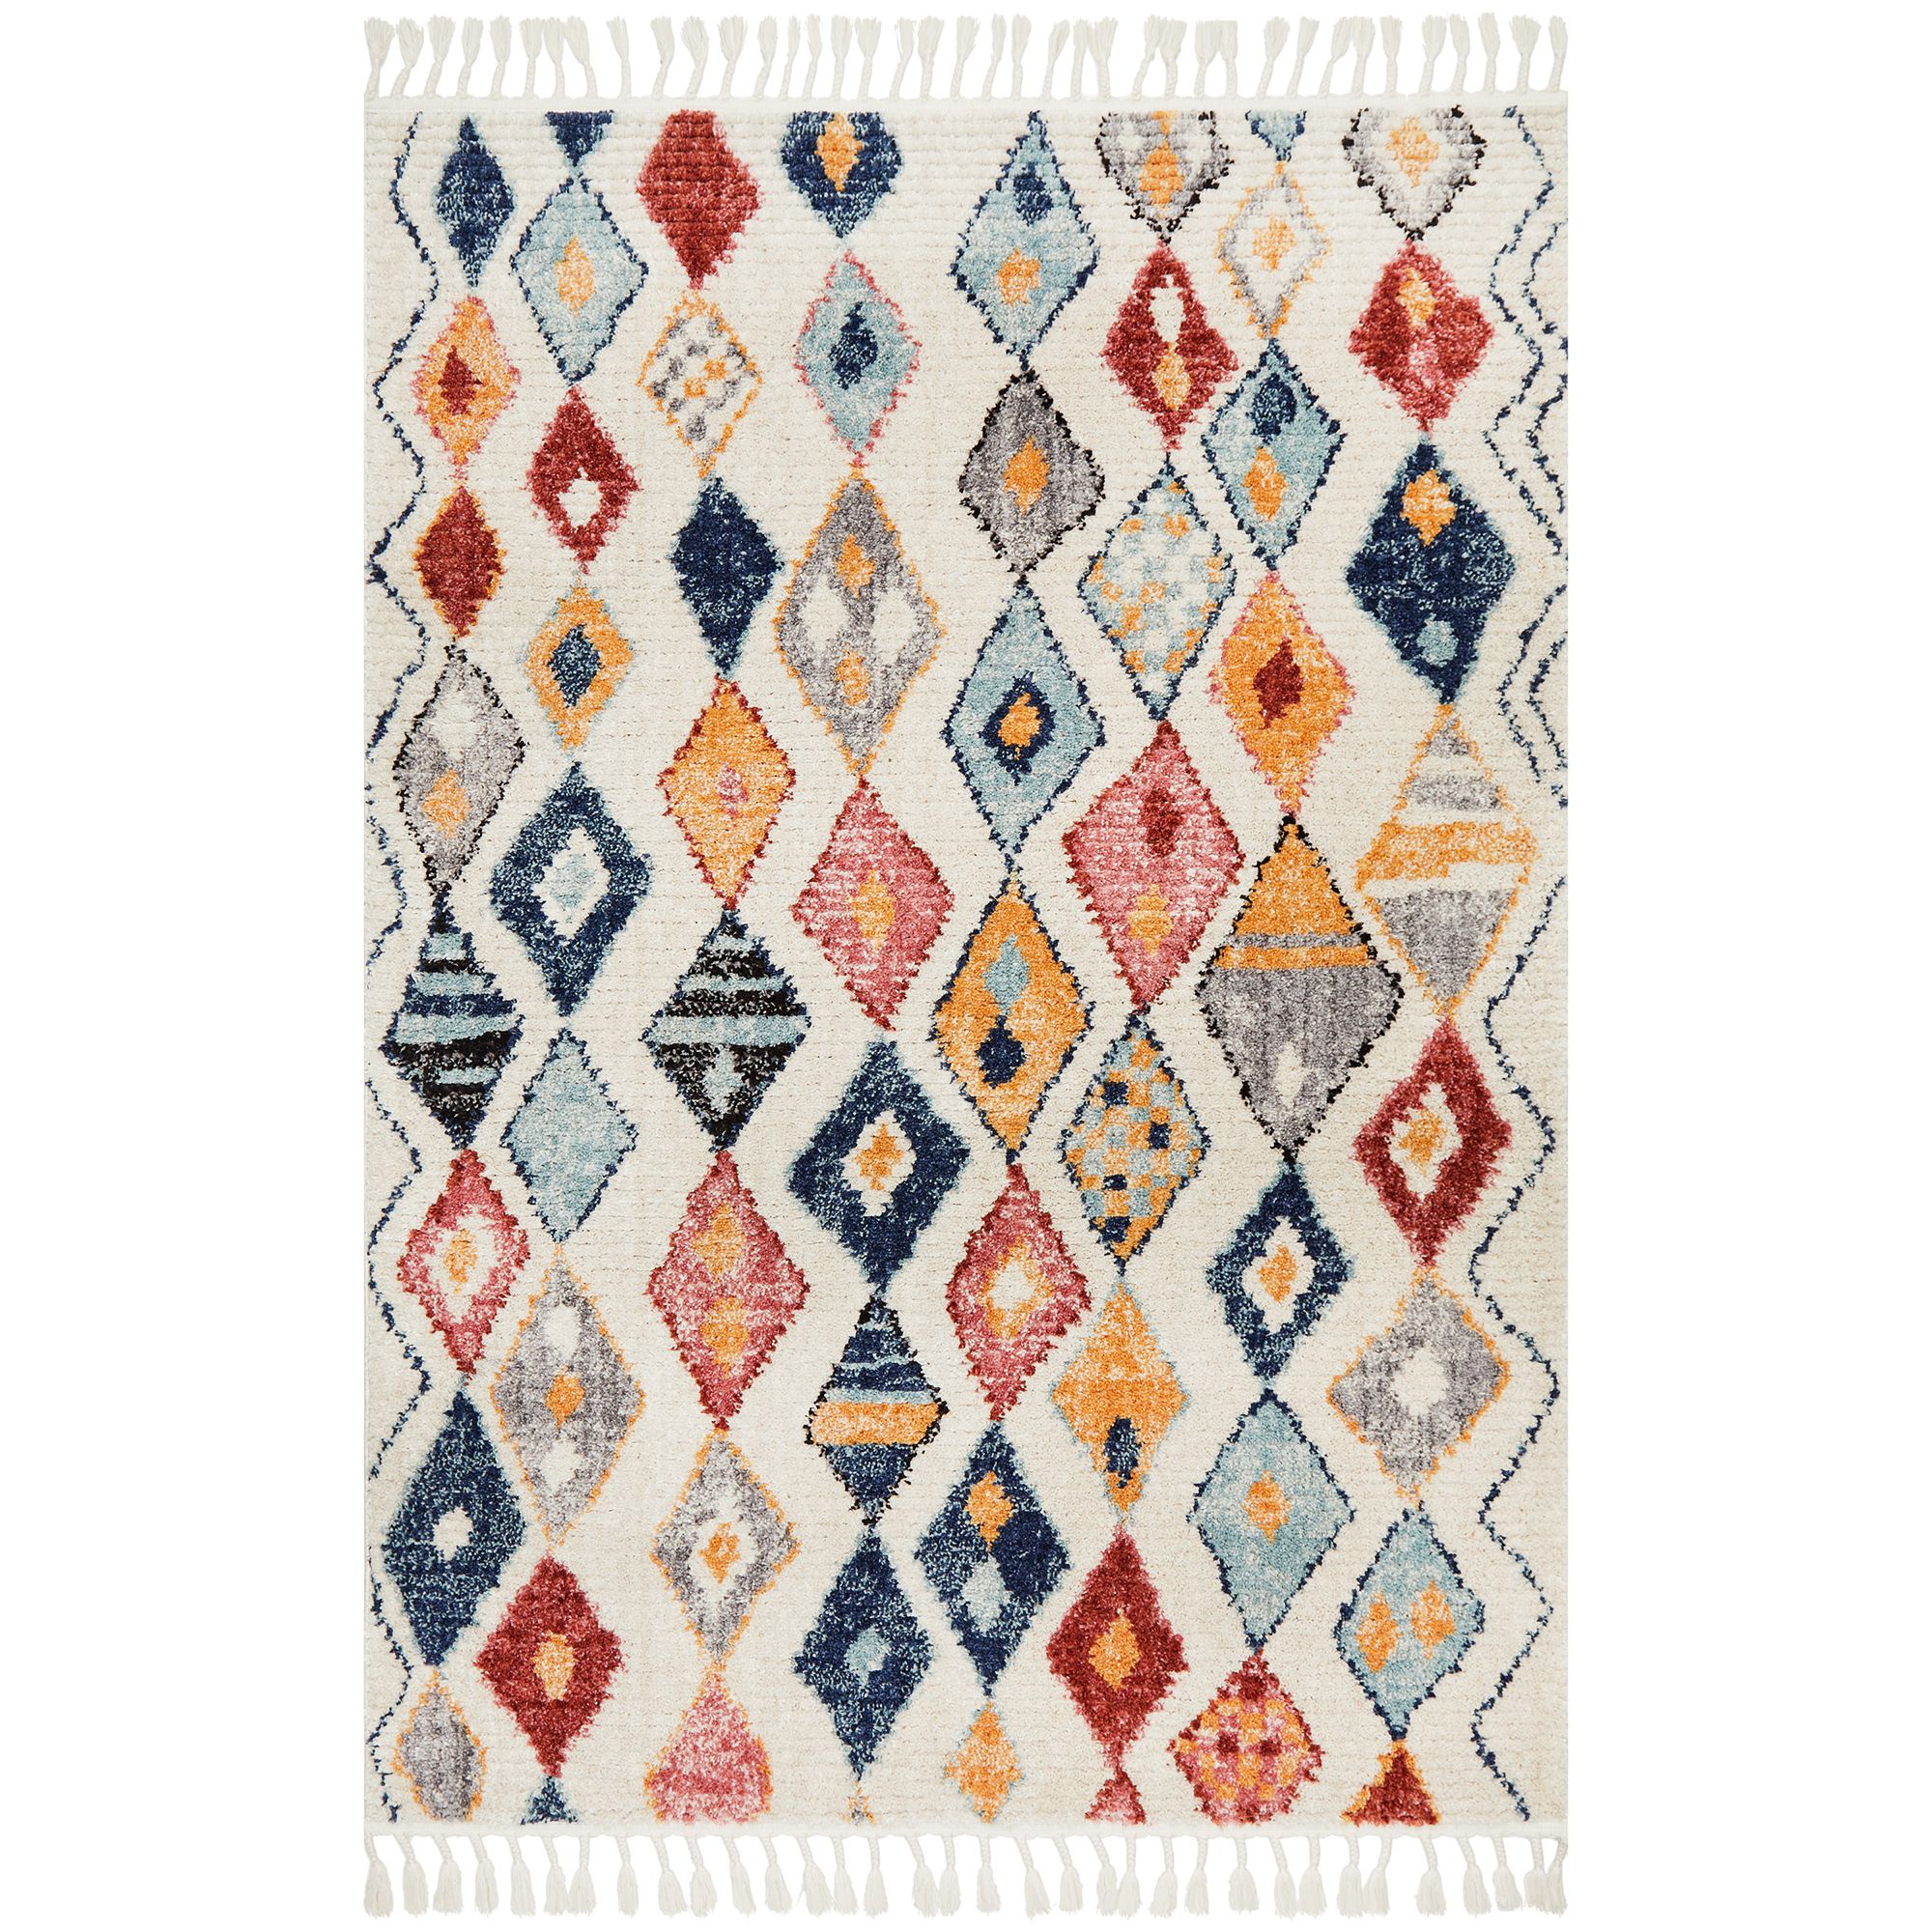 Network Plush Moroccan Rug | Temple & Webster With Moroccan Rugs (View 5 of 15)